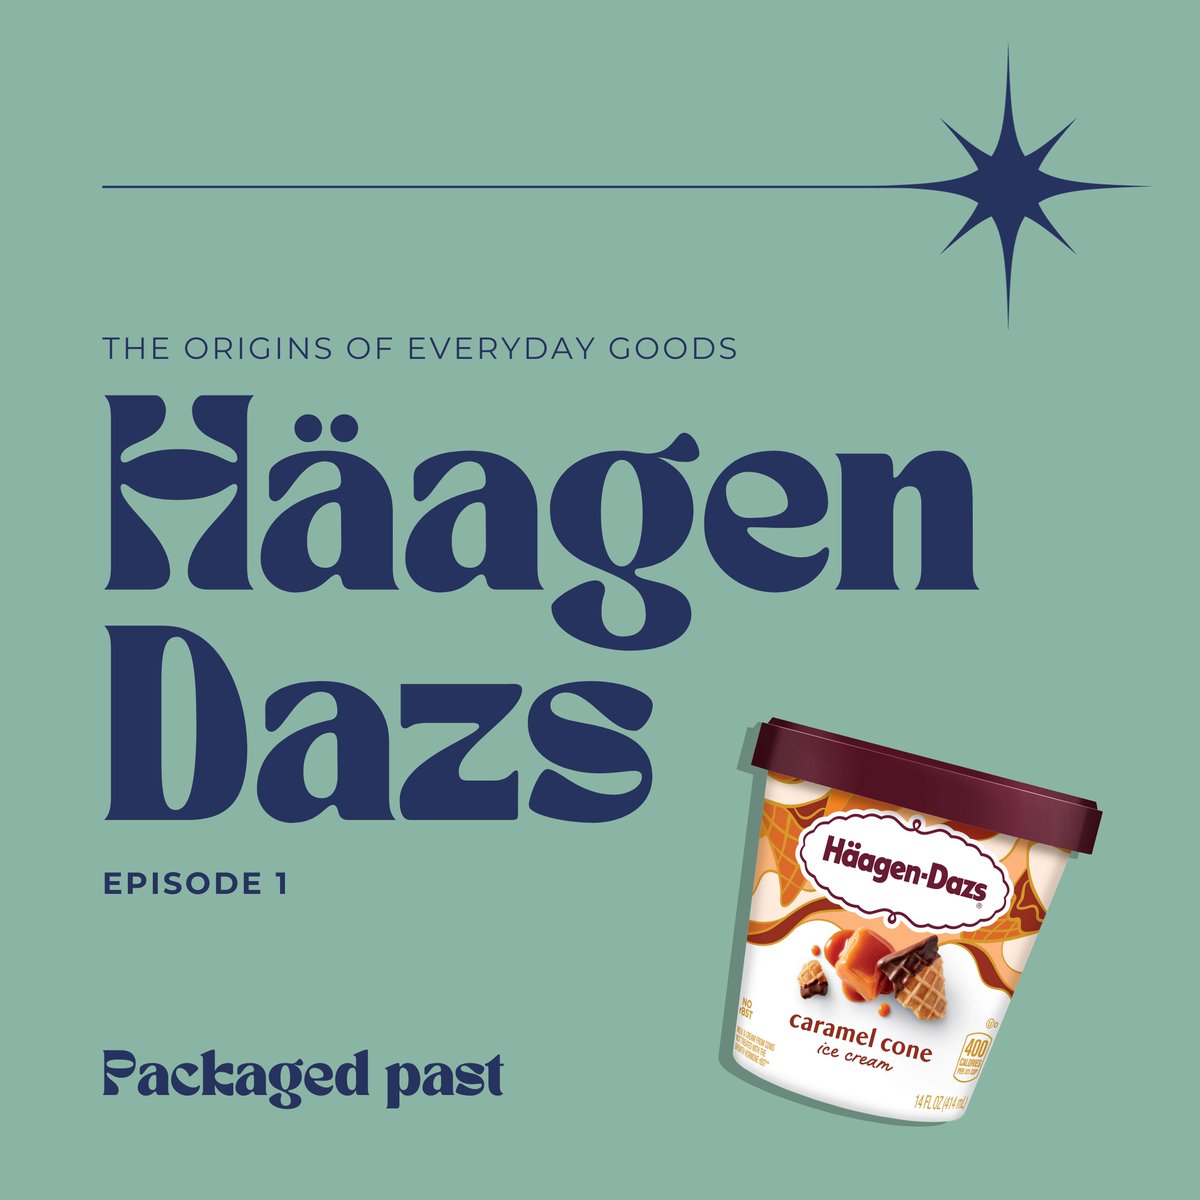 Do you want to know the history of legacy CPG brands like Häagen-Daz? Well @Clifford2009 and I just launched a podcast where we dive head first into the stories of our favorite food and drink brands!! Introducing Packaged Past! packagedpast.com